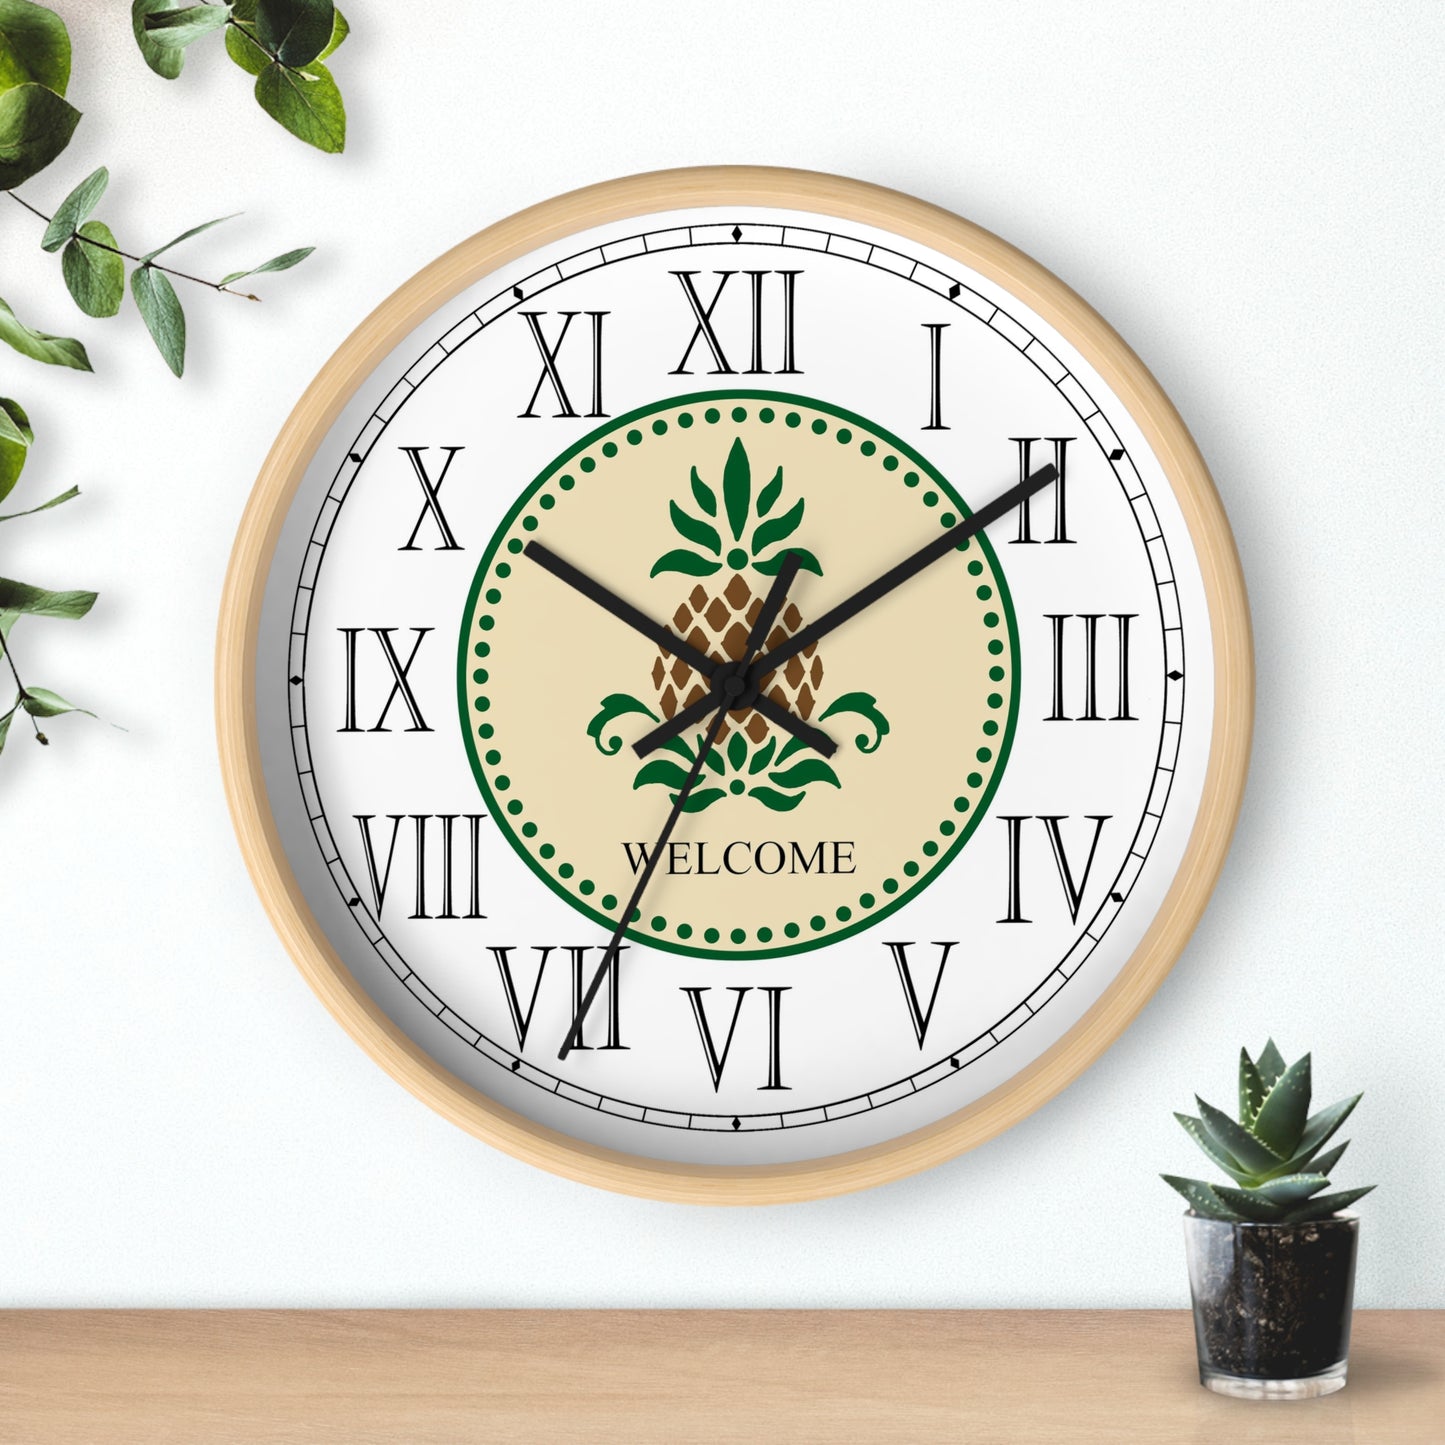 The WelcomeFolk Art Design Roman Numeral Clock will add an exciting and practical accent to any room. This charming clock features Roman Numerals and will serve as a statement piece and create a personalized environment in your room. The pineapple has long been a symbol of welcome and hospitality. The Welcome Folk Art Design is a reproduction of a fine art design by Lee M. Buchanan.